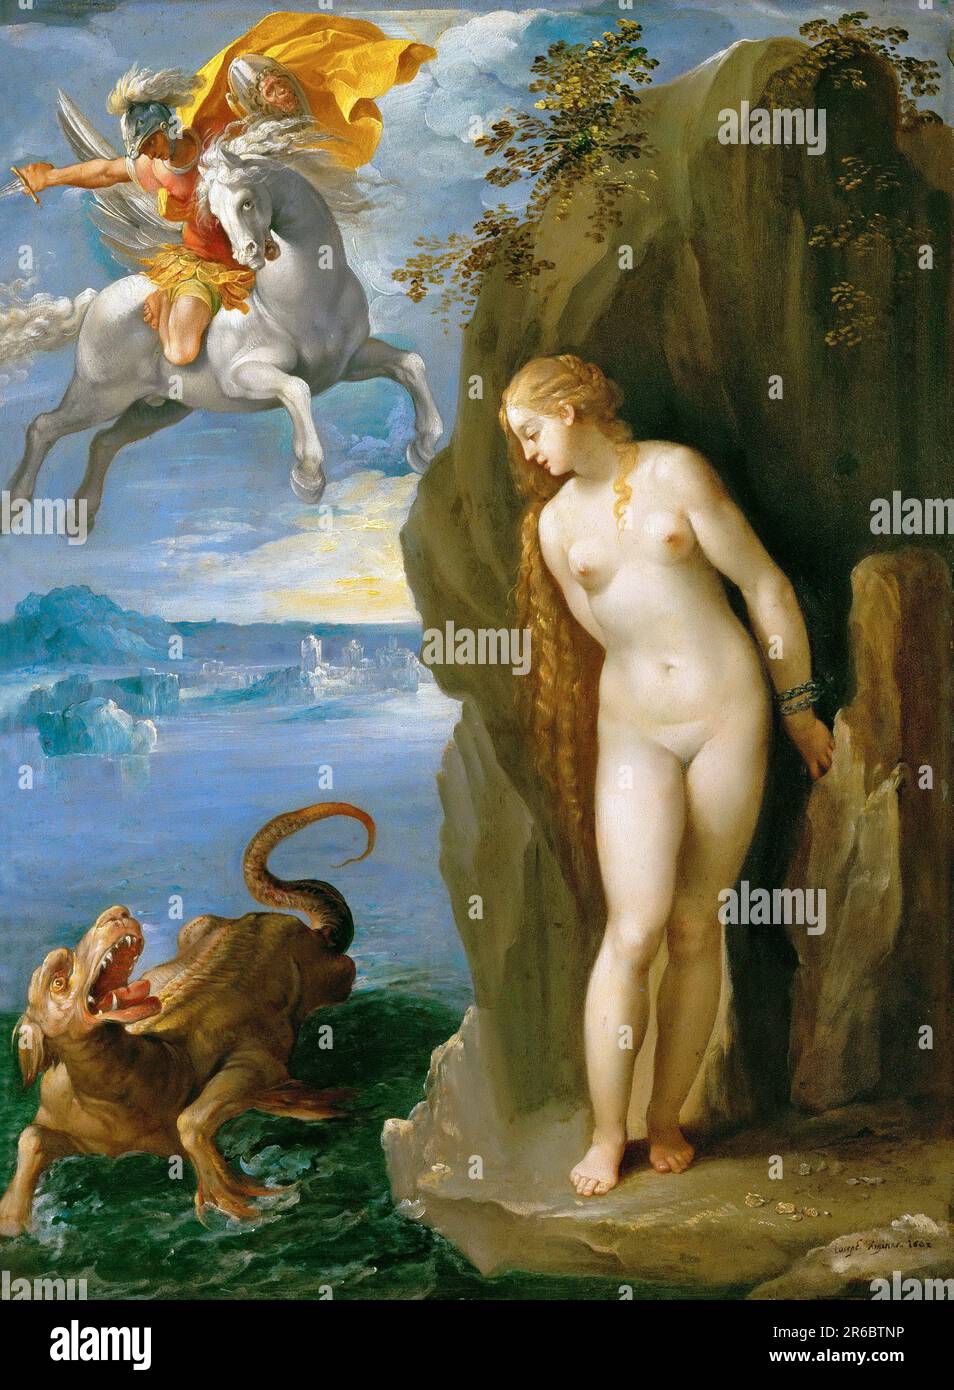 Andromeda, in Greek mythology the wife of Perseus and the daughter of the Ethiopian king Cepheus. To atone for her mother's hubris, Andromeda is to be offered as a human sacrifice to a sea monster of Poseidon and is chained to a rock, painting by Giuseppe Cesari, Historical, digitally restored reproduction from a 19th century original  /  Andromeda, in der griechischen Mythologie die Gattin des Perseus und die Tochter des äthiopischen Königs Kepheus. Um die Hybris ihrer Mutter zu sühnen, soll Andromeda als Menschenopfer einem Seeungeheuer des Poseidon dargebracht werden und wird an einen Felse Stock Photo